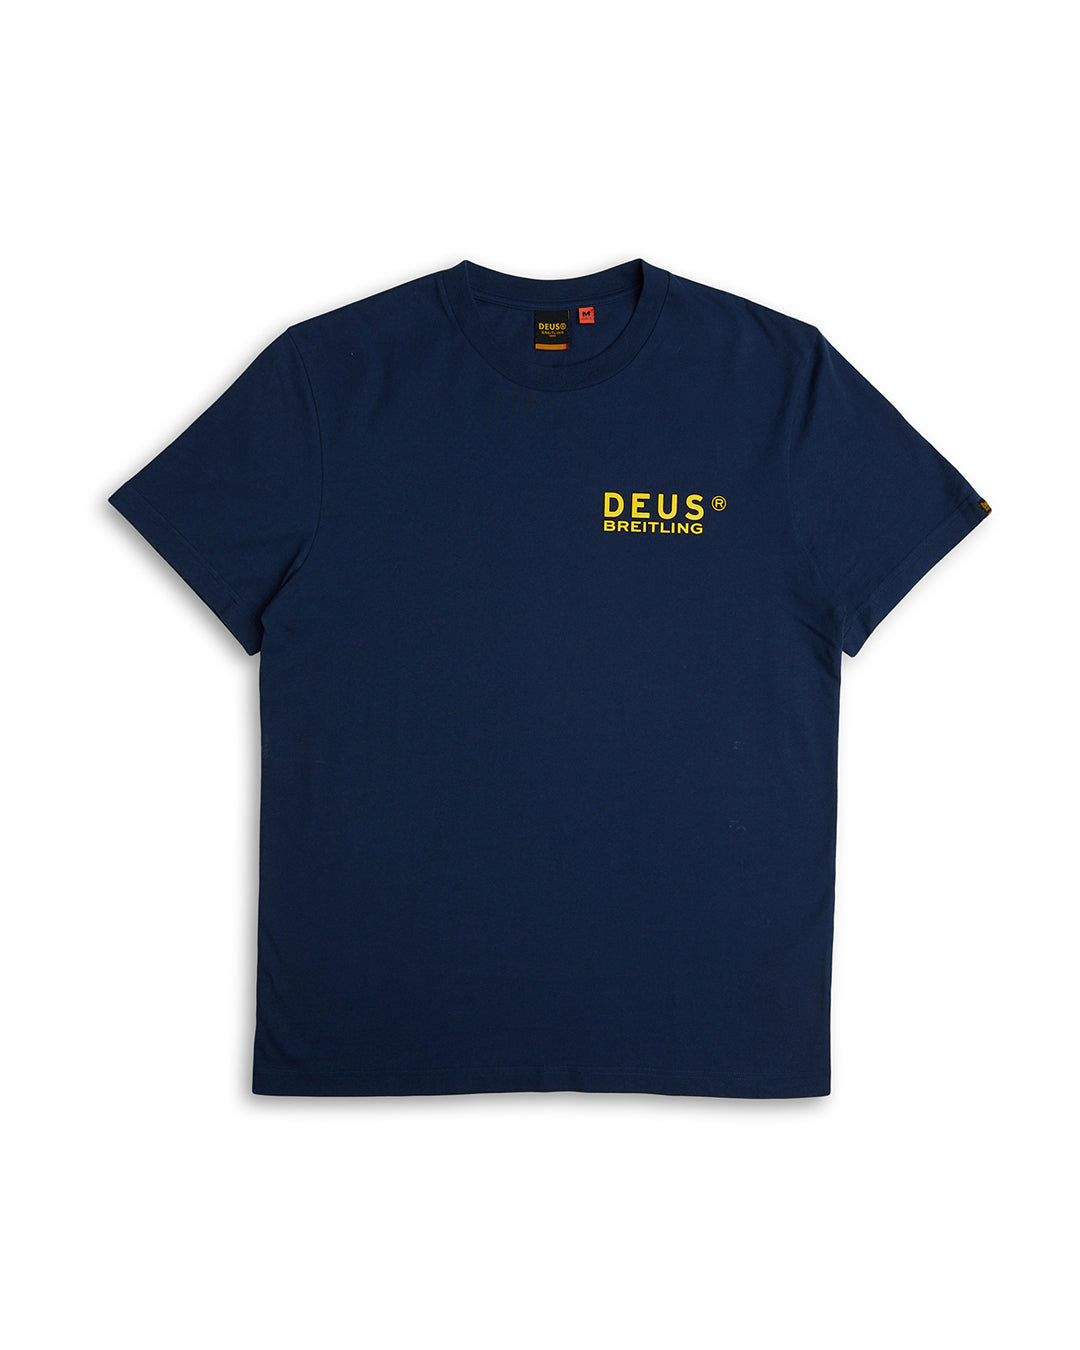 Formation Tee - Navy